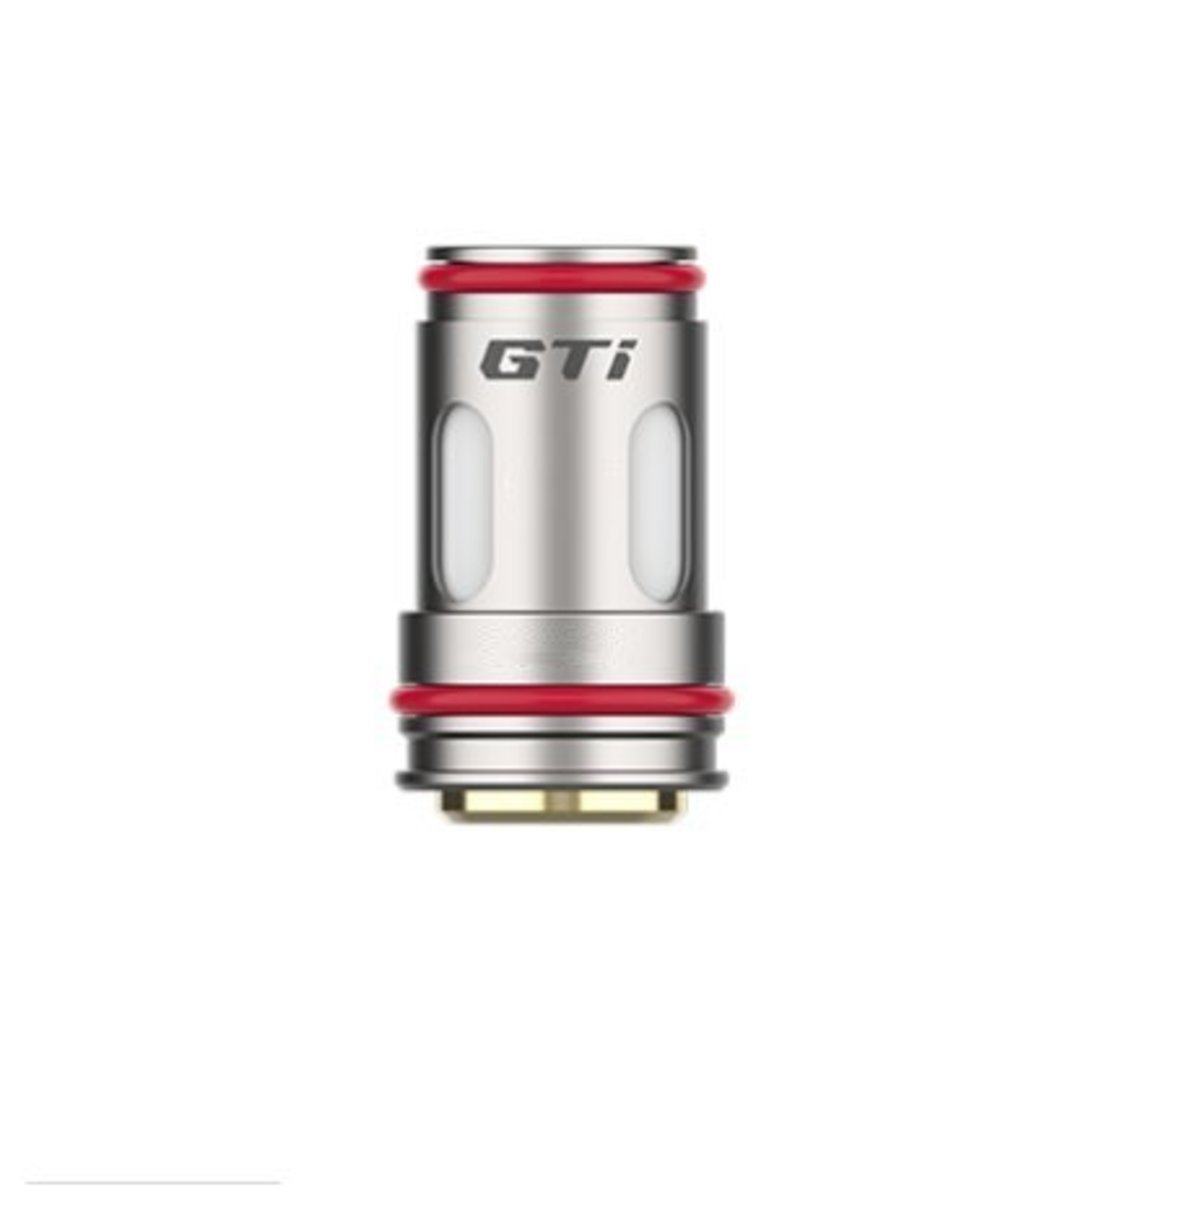 Vaporesso GTi Coils-Pack of 5 - Wolfvapes.co.uk-0.5 ohm MESH